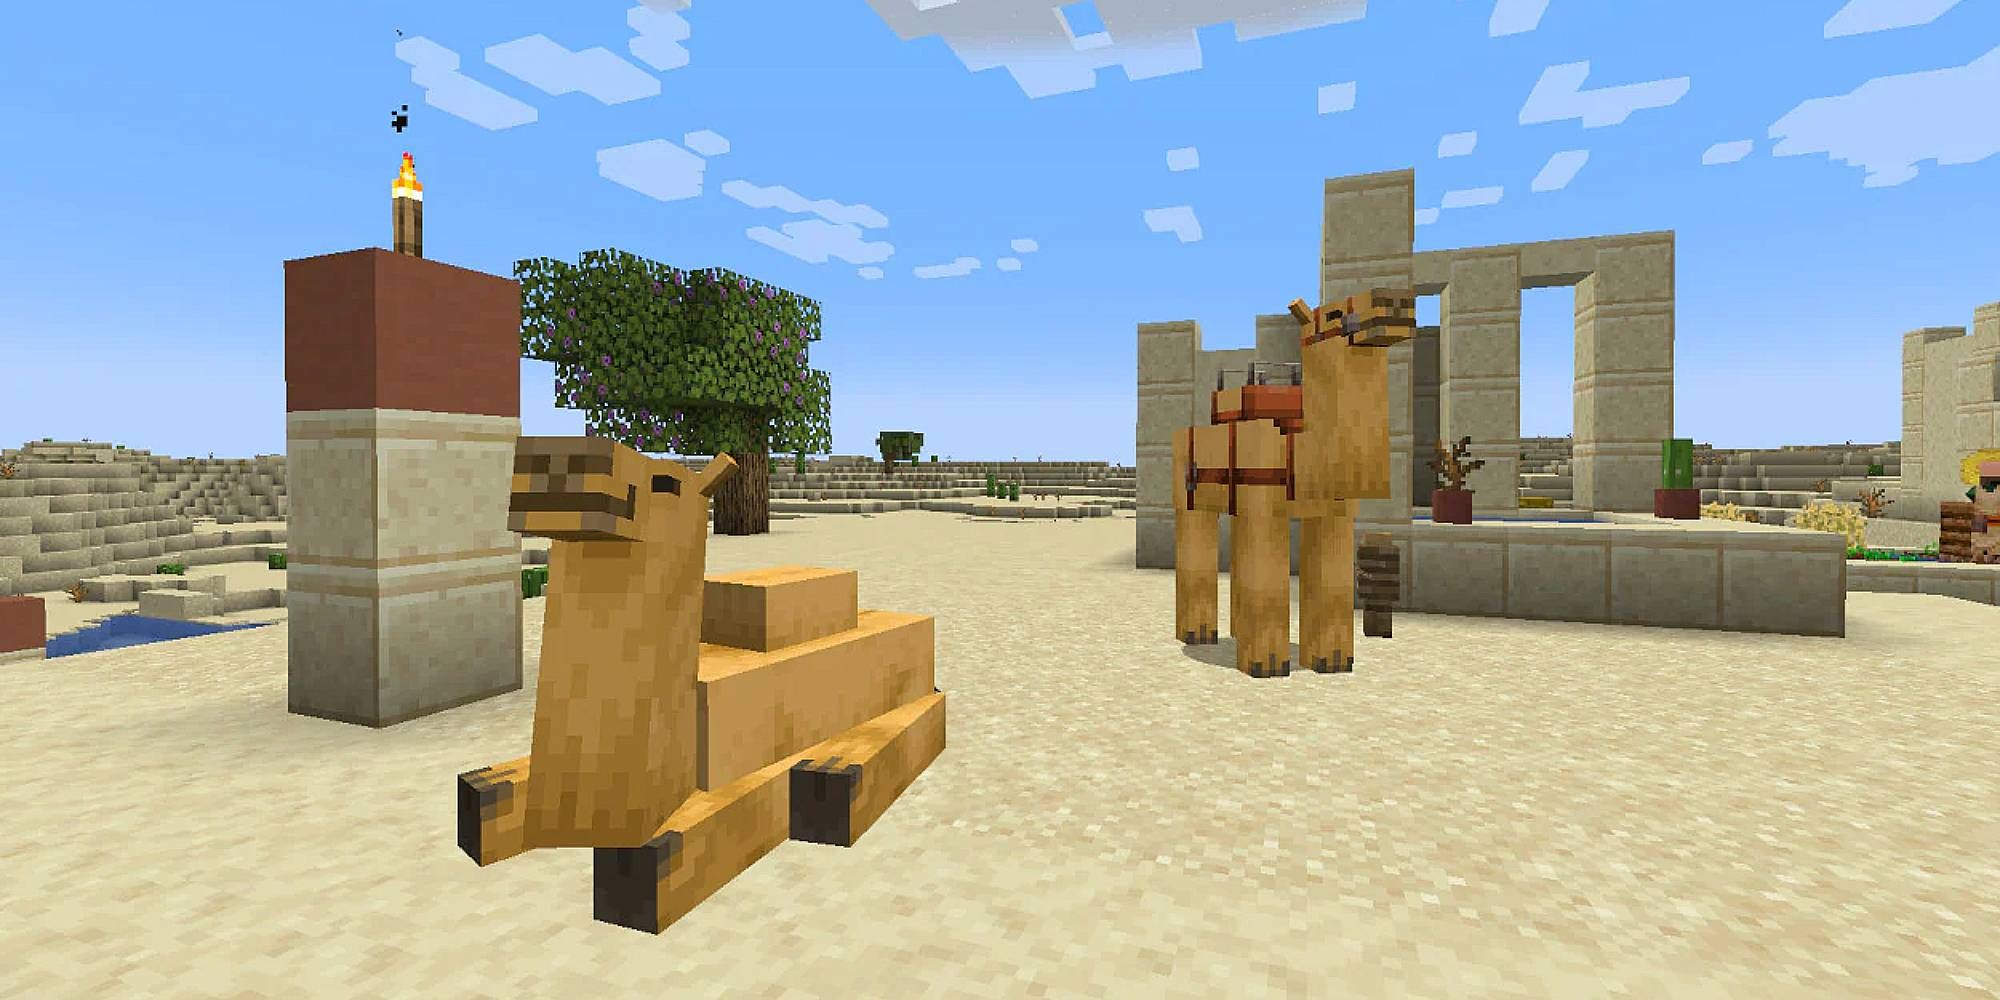 A pair of camels relax in the desert biome of Minecraft